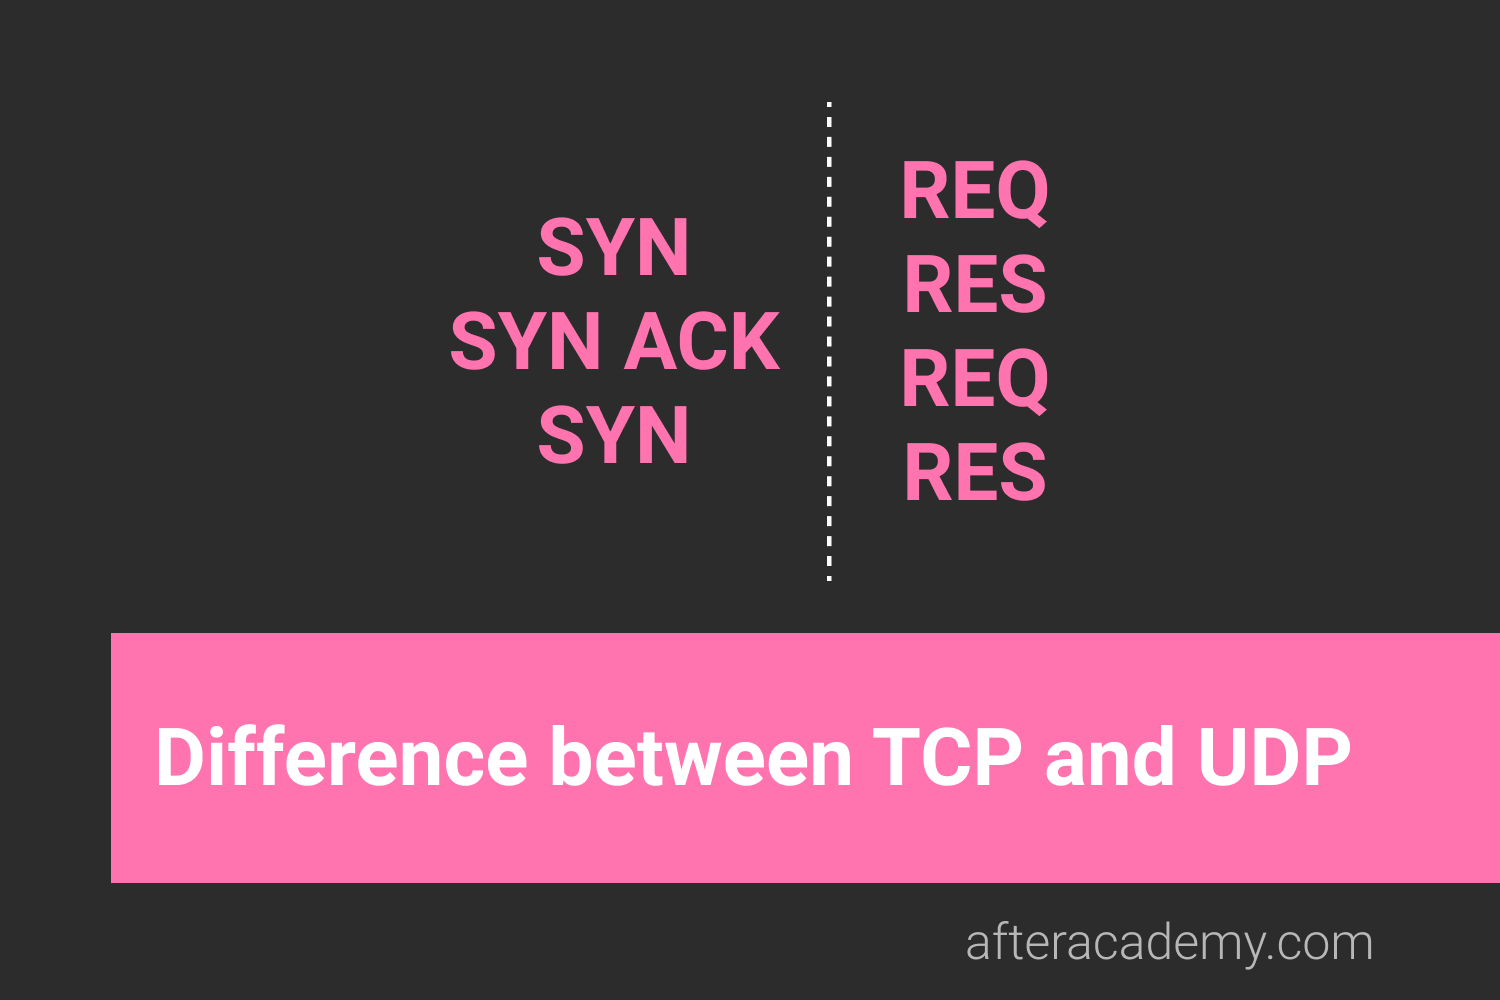 What is the difference between TCP and UDP?